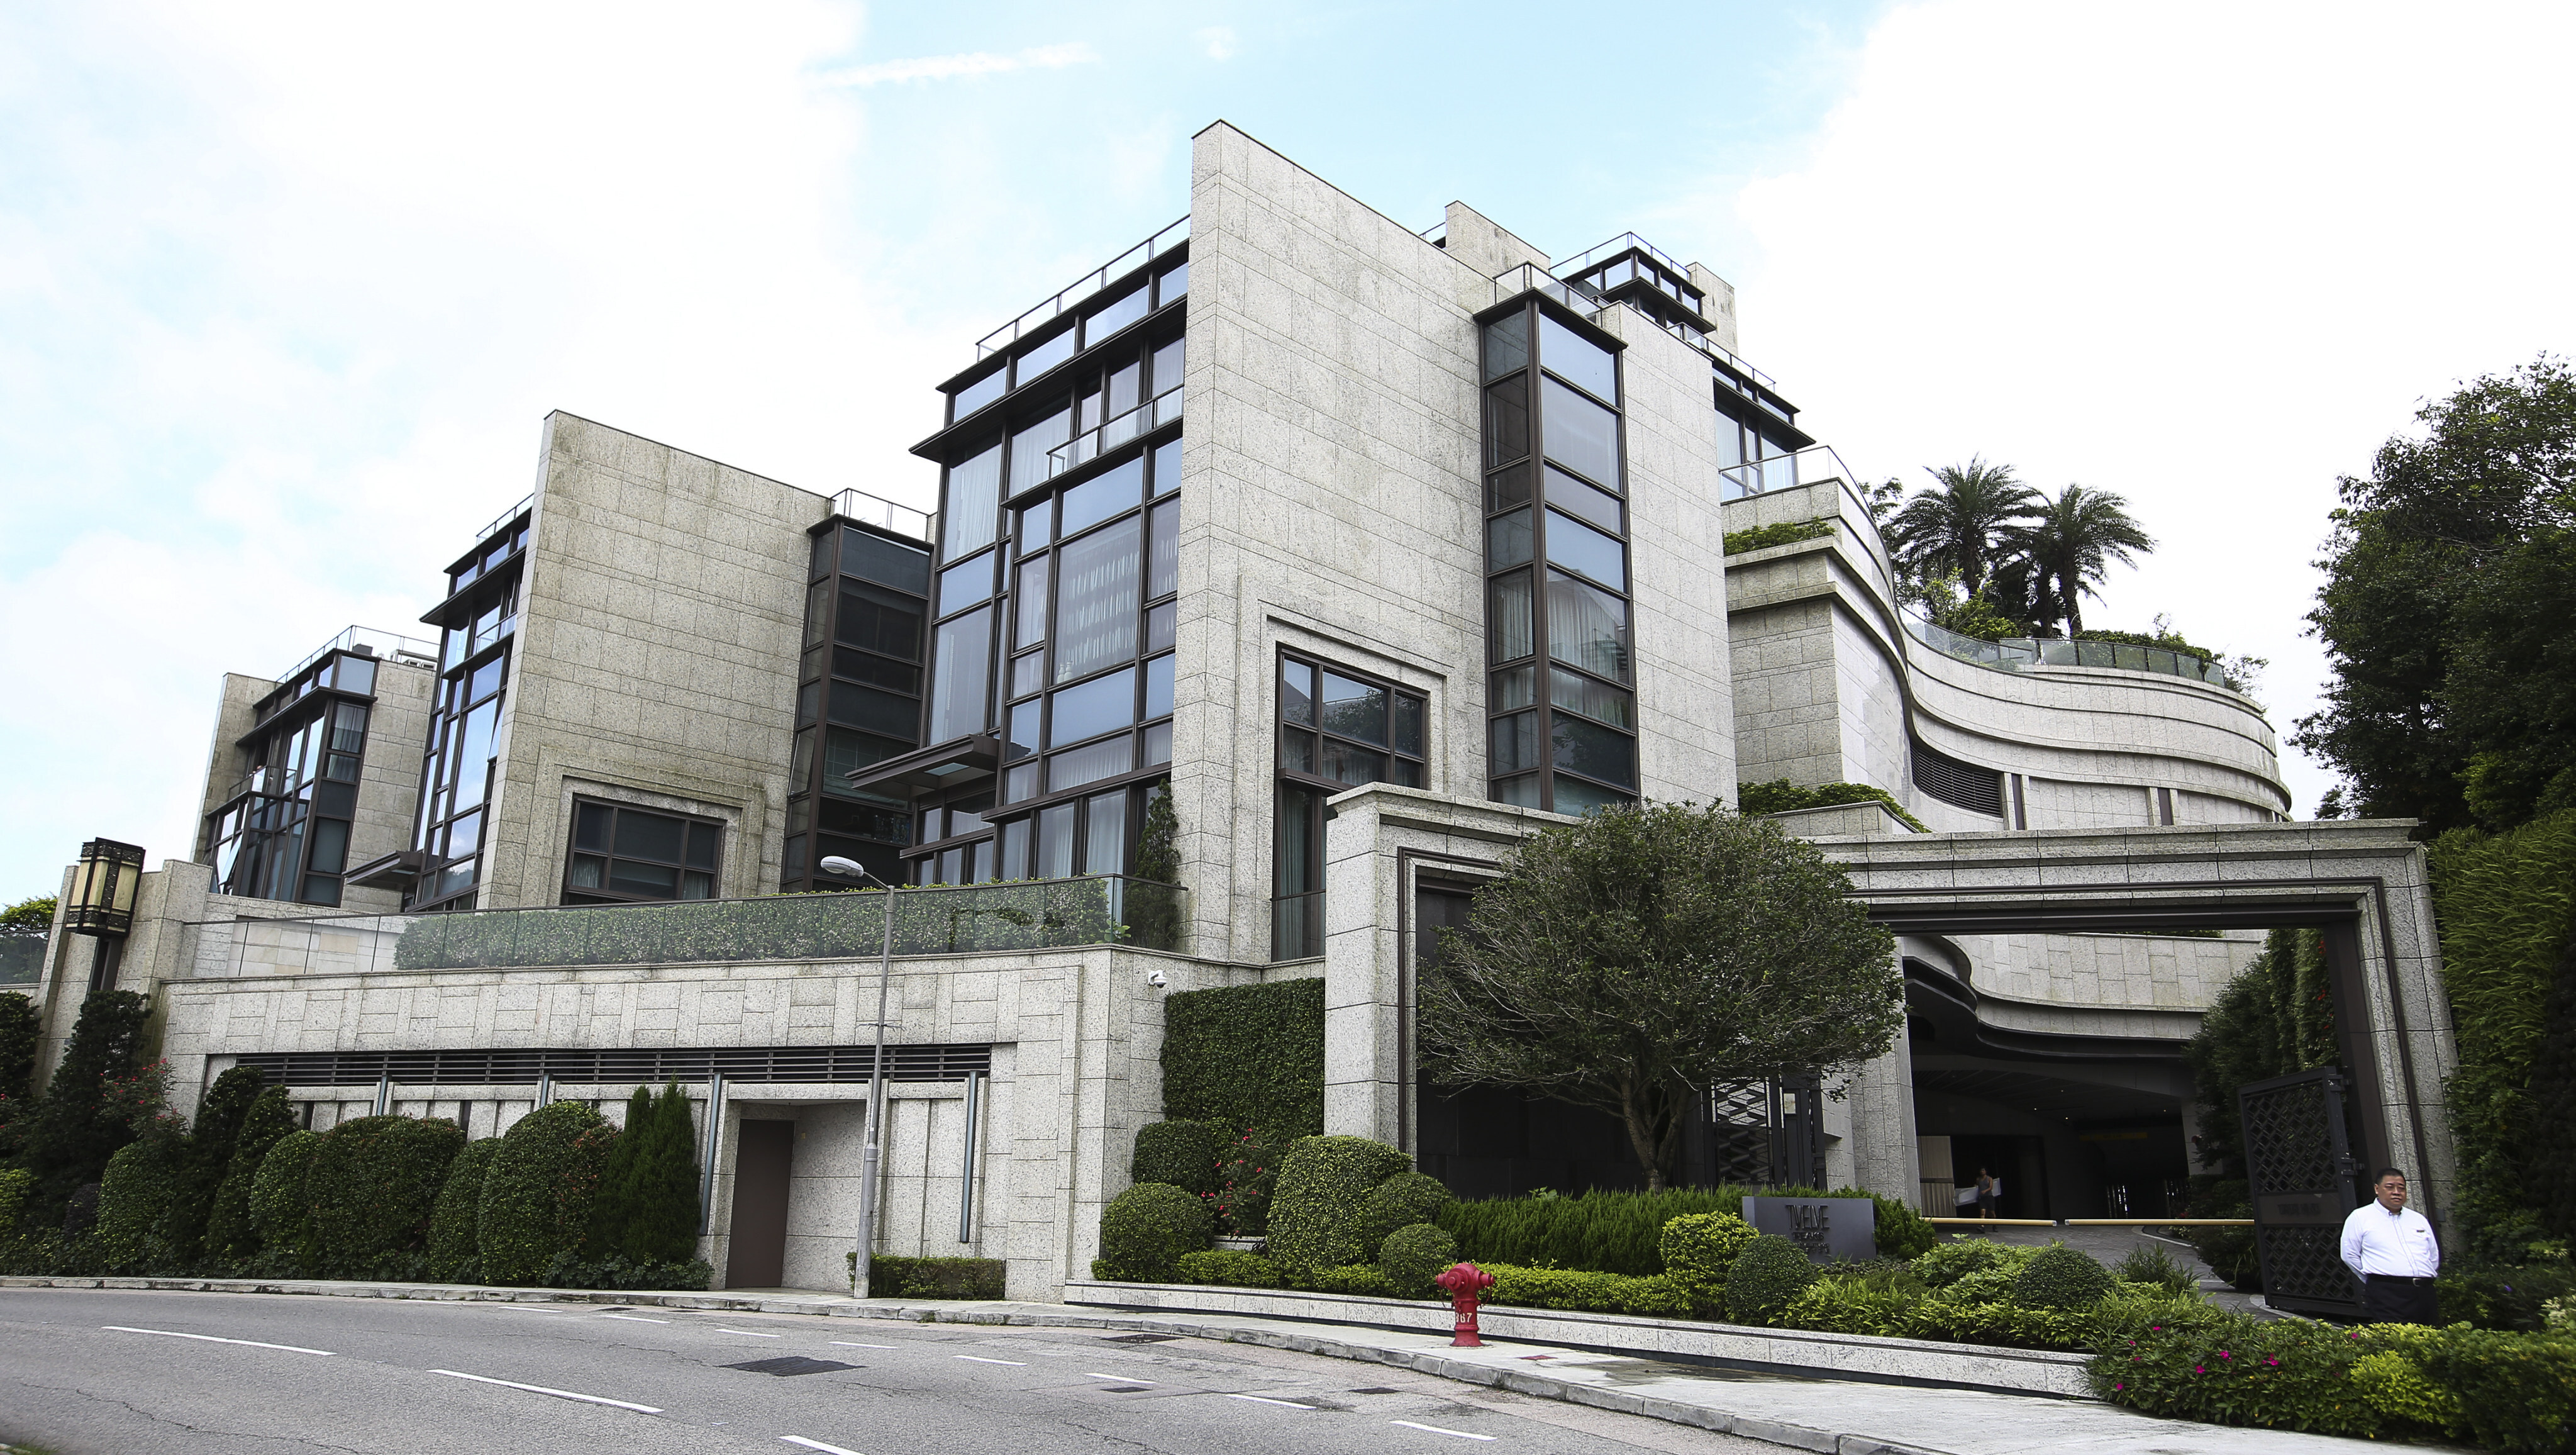 The price of the villa was 23.5 per cent lower than the purchase price of HK$506 million paid by the original buyer in 2015. Photo: Edmond So